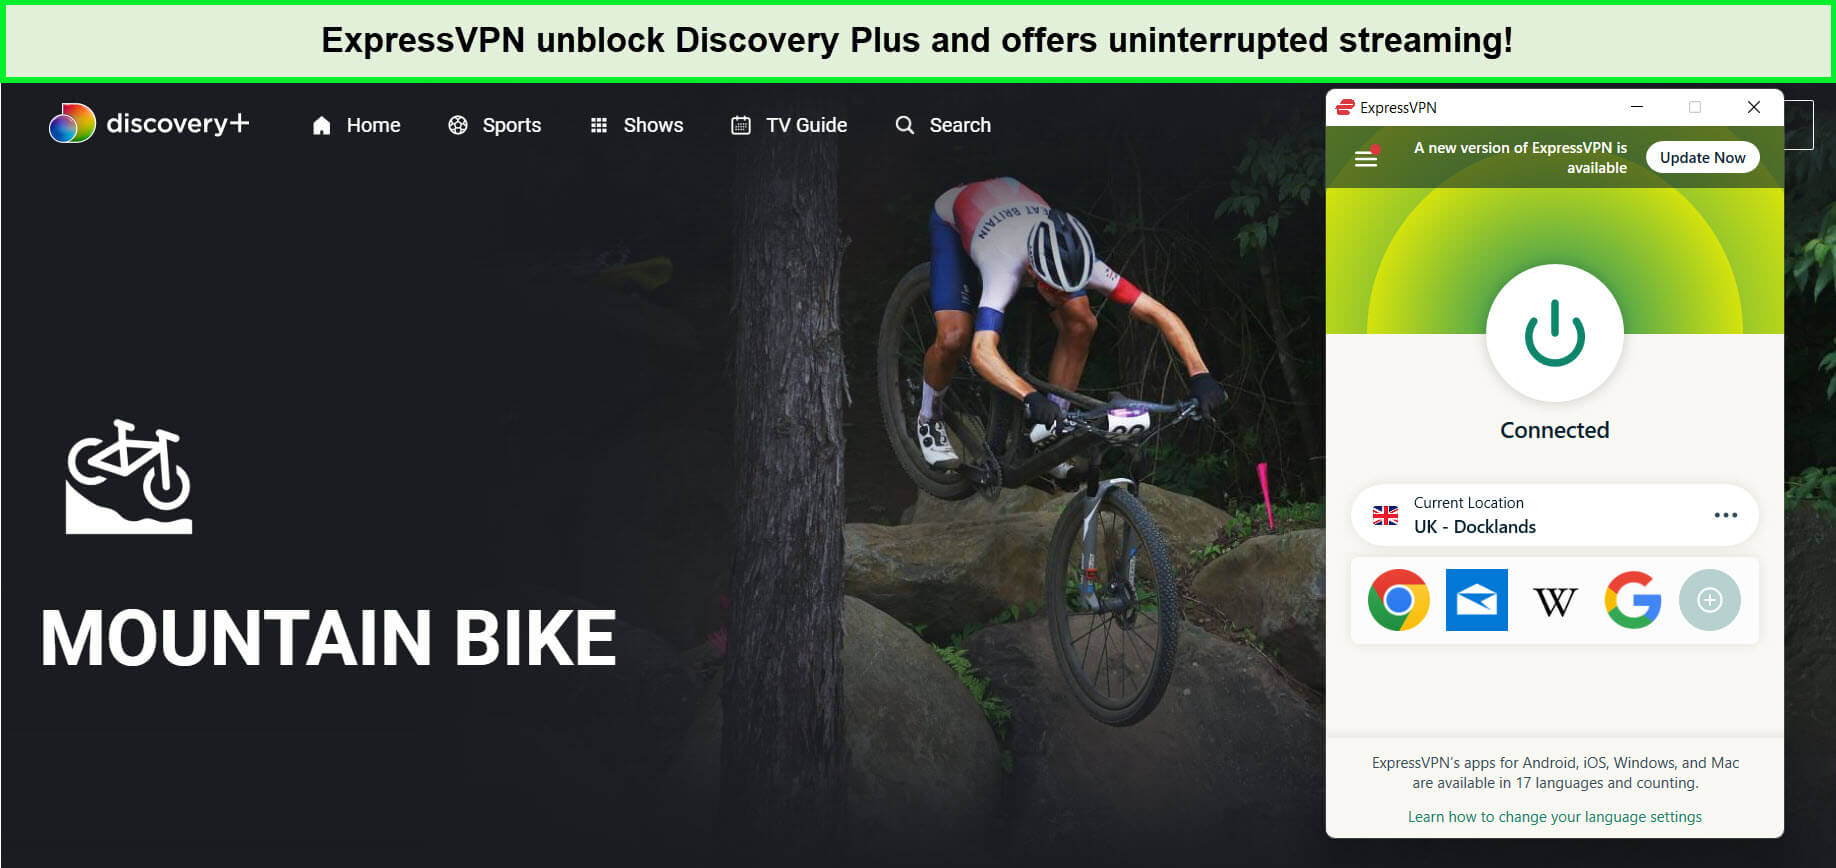 expressvpn-unblocks-uci-mountain-bike-world-series-in-Spain-on-discovery-plus